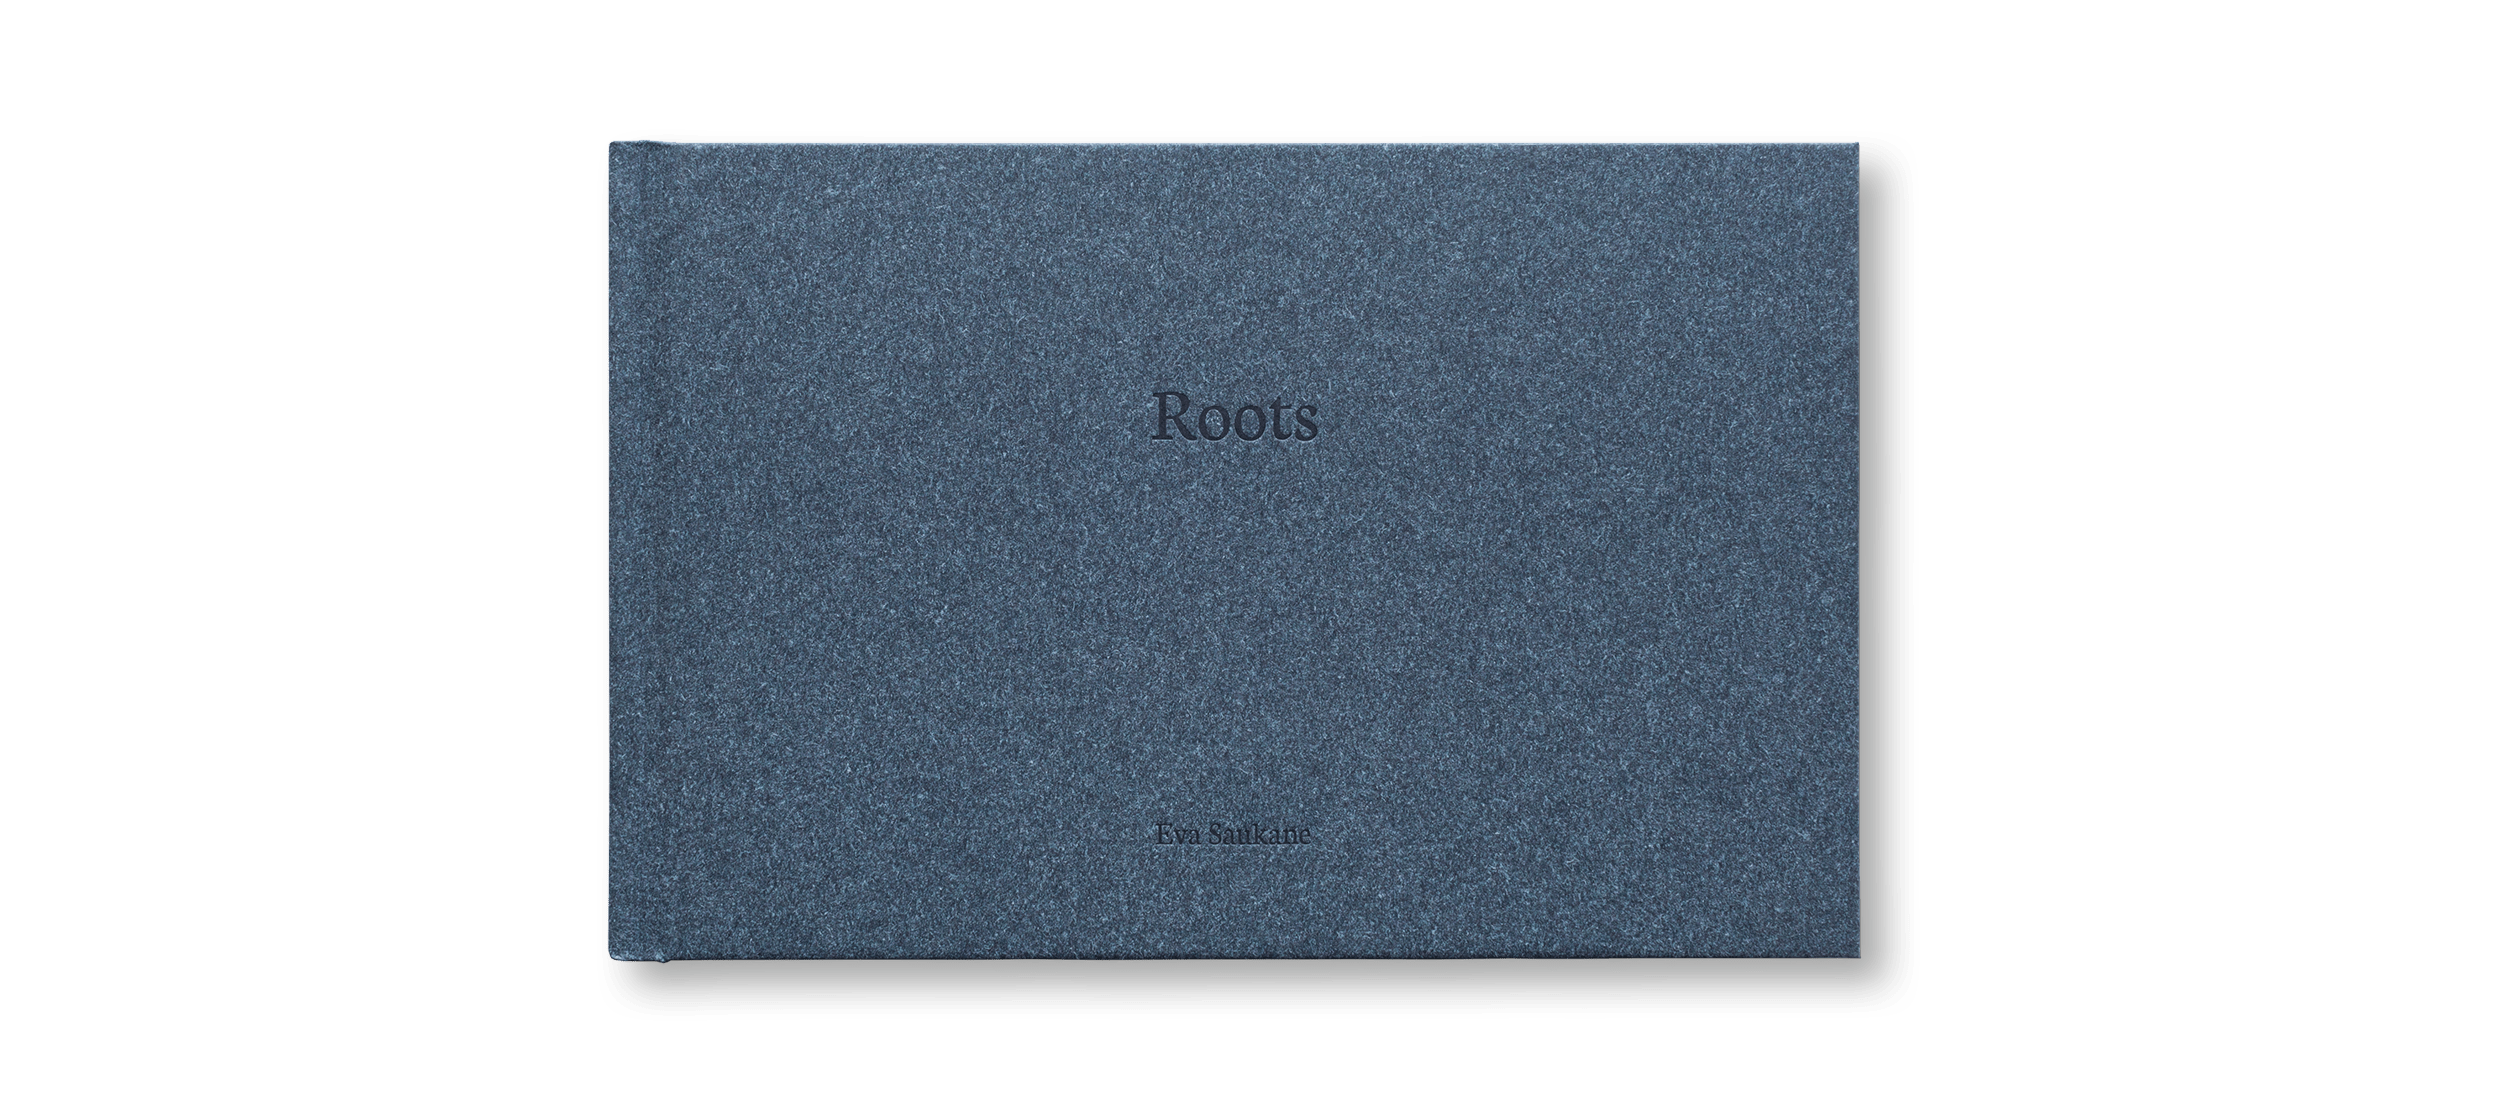 Roots-00-min.png